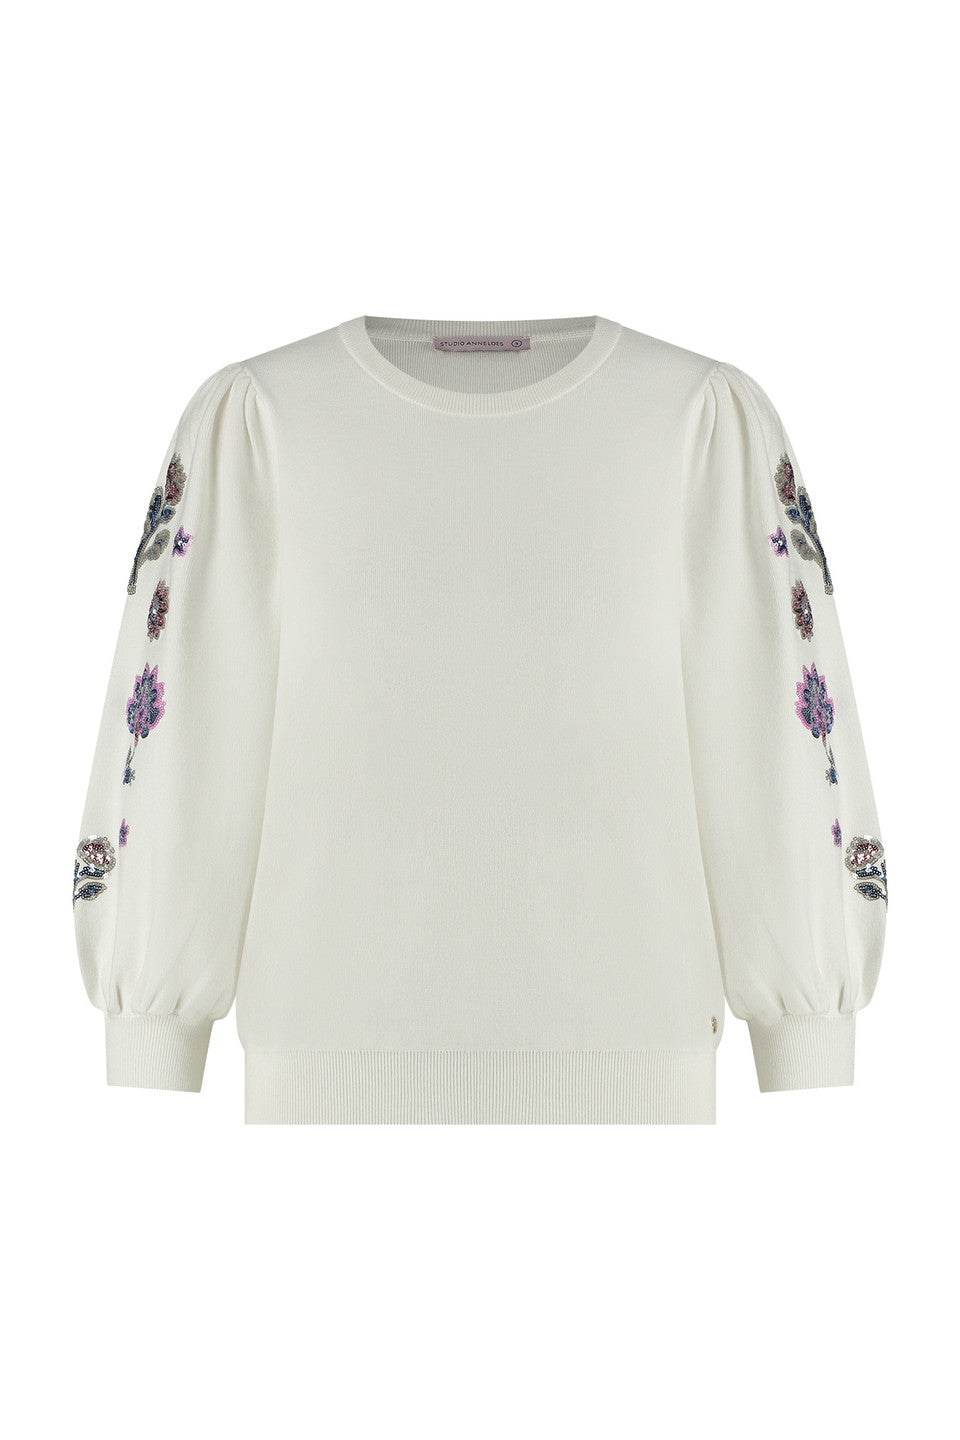 Studio Anneloes Hollie embroidery pullover